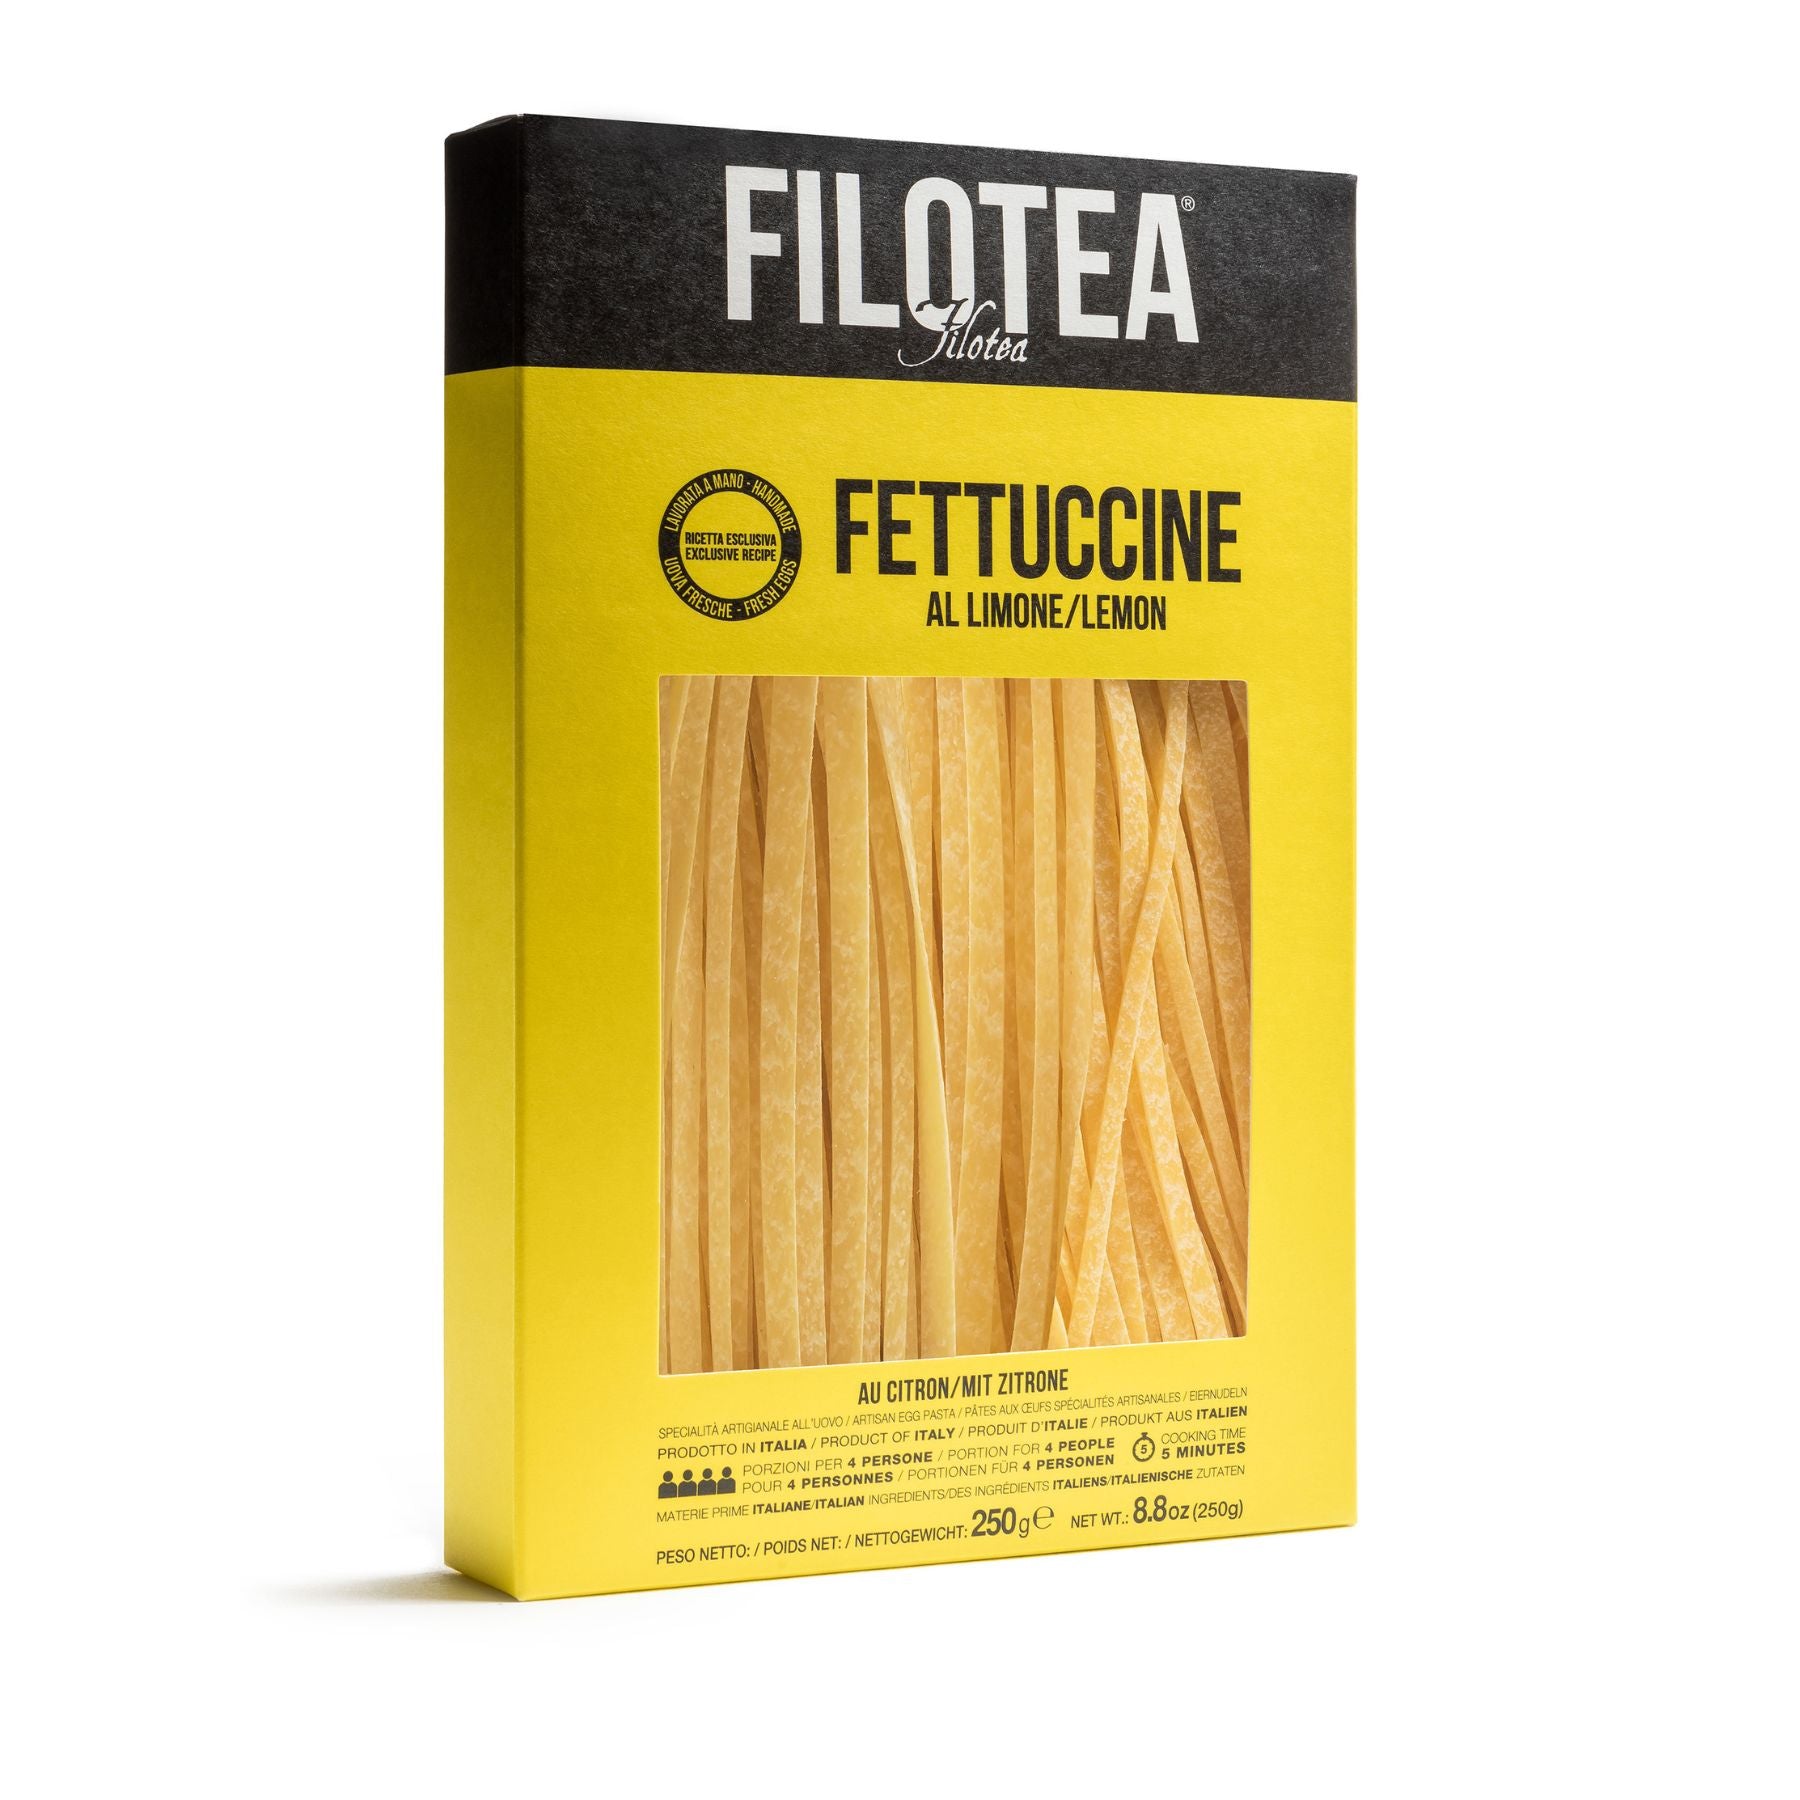 Filotea Lemon Fettuccine Artisan Egg Pasta 250g | Imported and distributed in the UK by Just Gourmet Foods